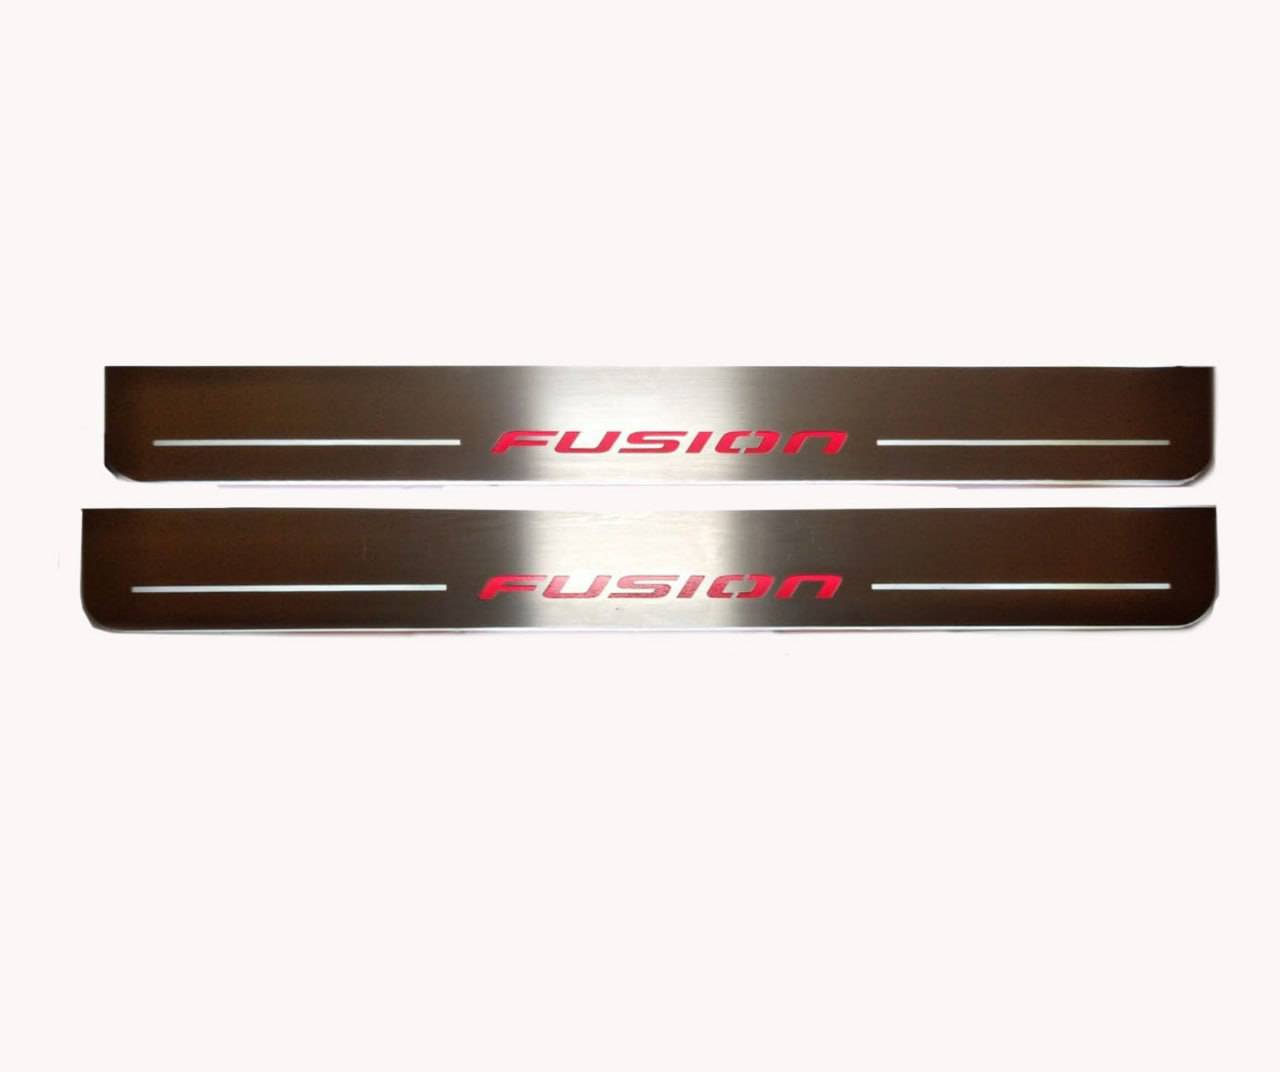 Ford Fusion 2012+ LED Door Sills PRO With FUSION Logo - decoinfabric